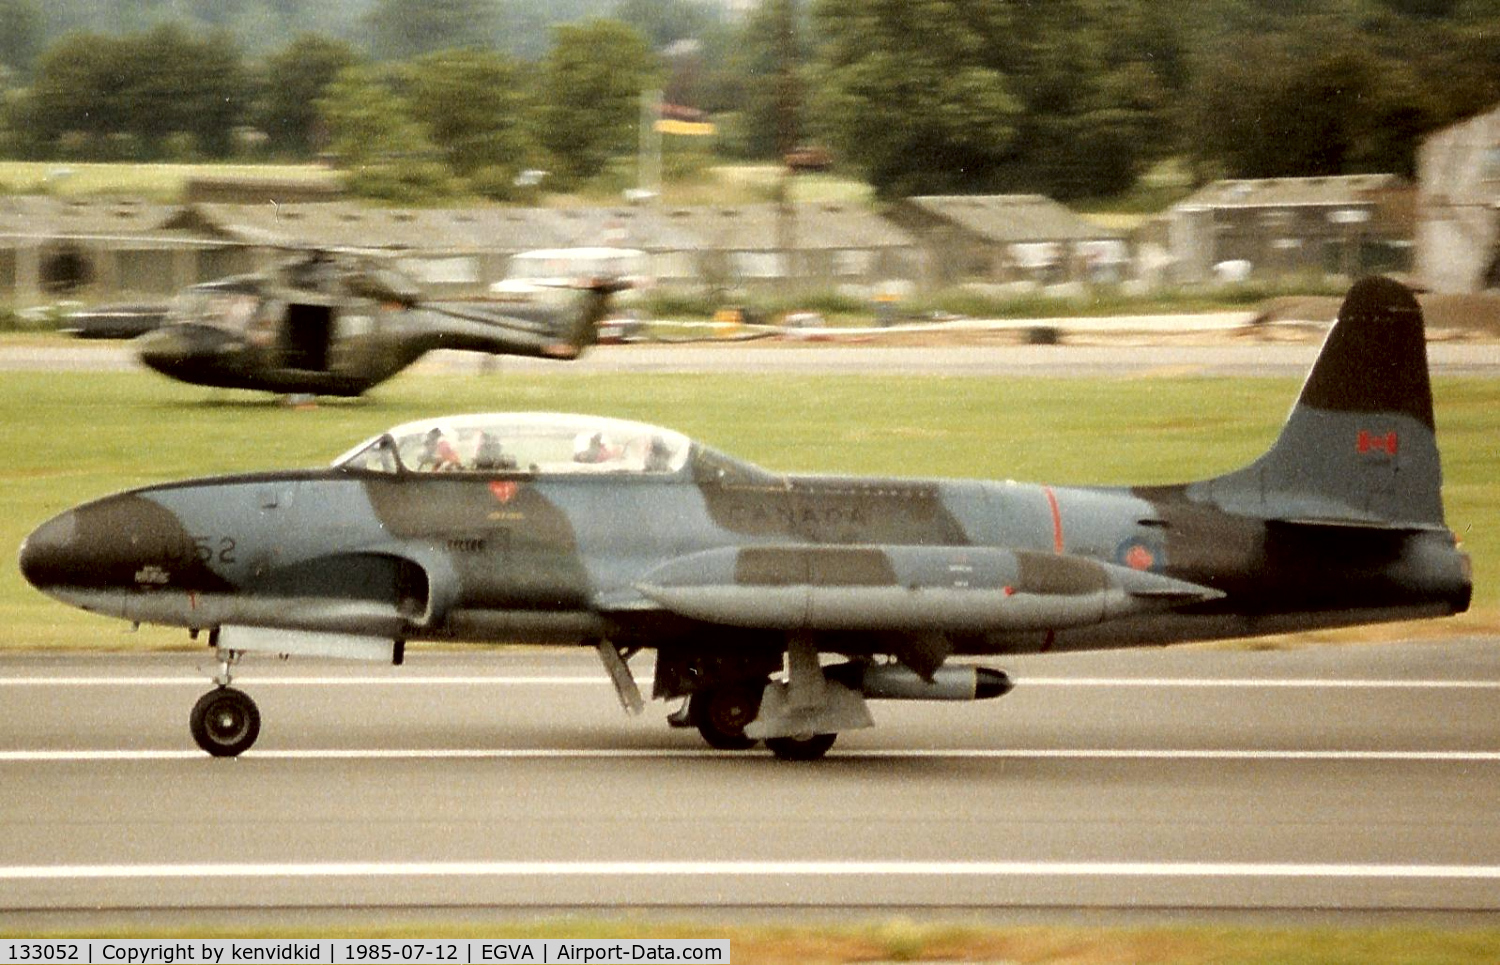 133052, Canadair CT-133 Silver Star C/N T33-052, Royal Canadian Air Force arriving at IAT.